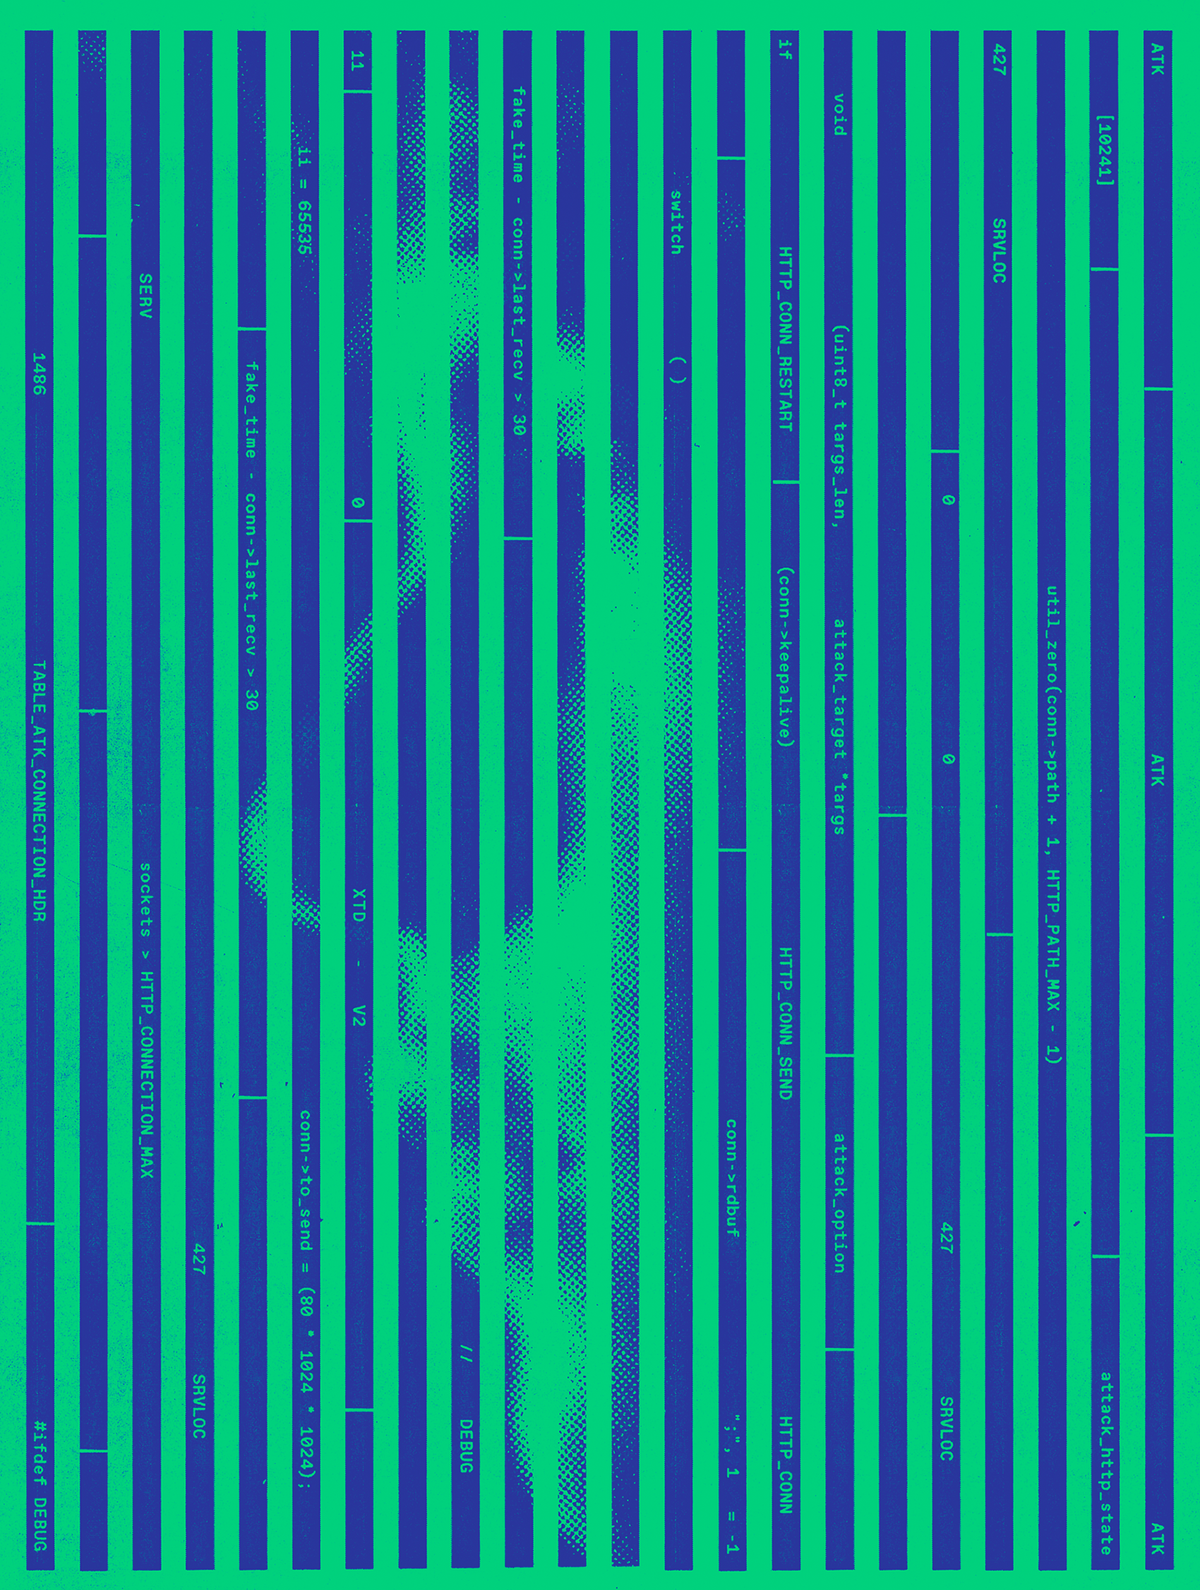 An image of blue and green lines with a face in blue line areas.  